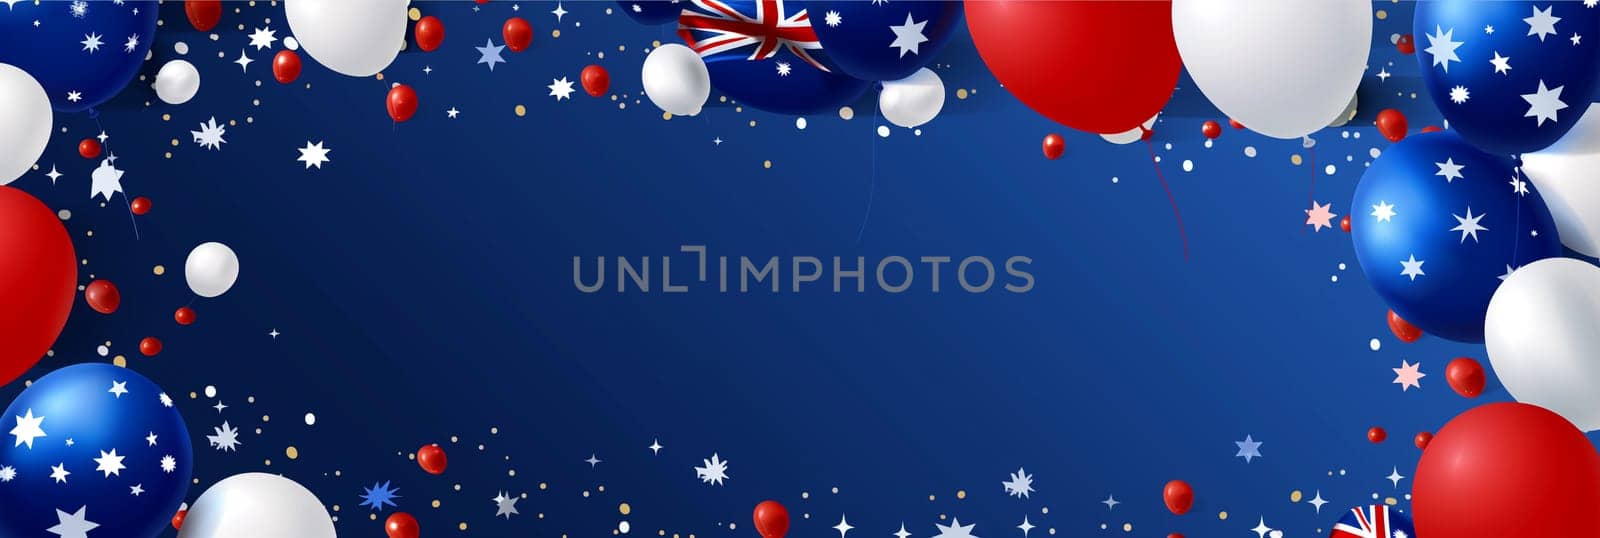 Australian flag-themed balloons floating against a vibrant blue background to celebrate Western Australia Day.